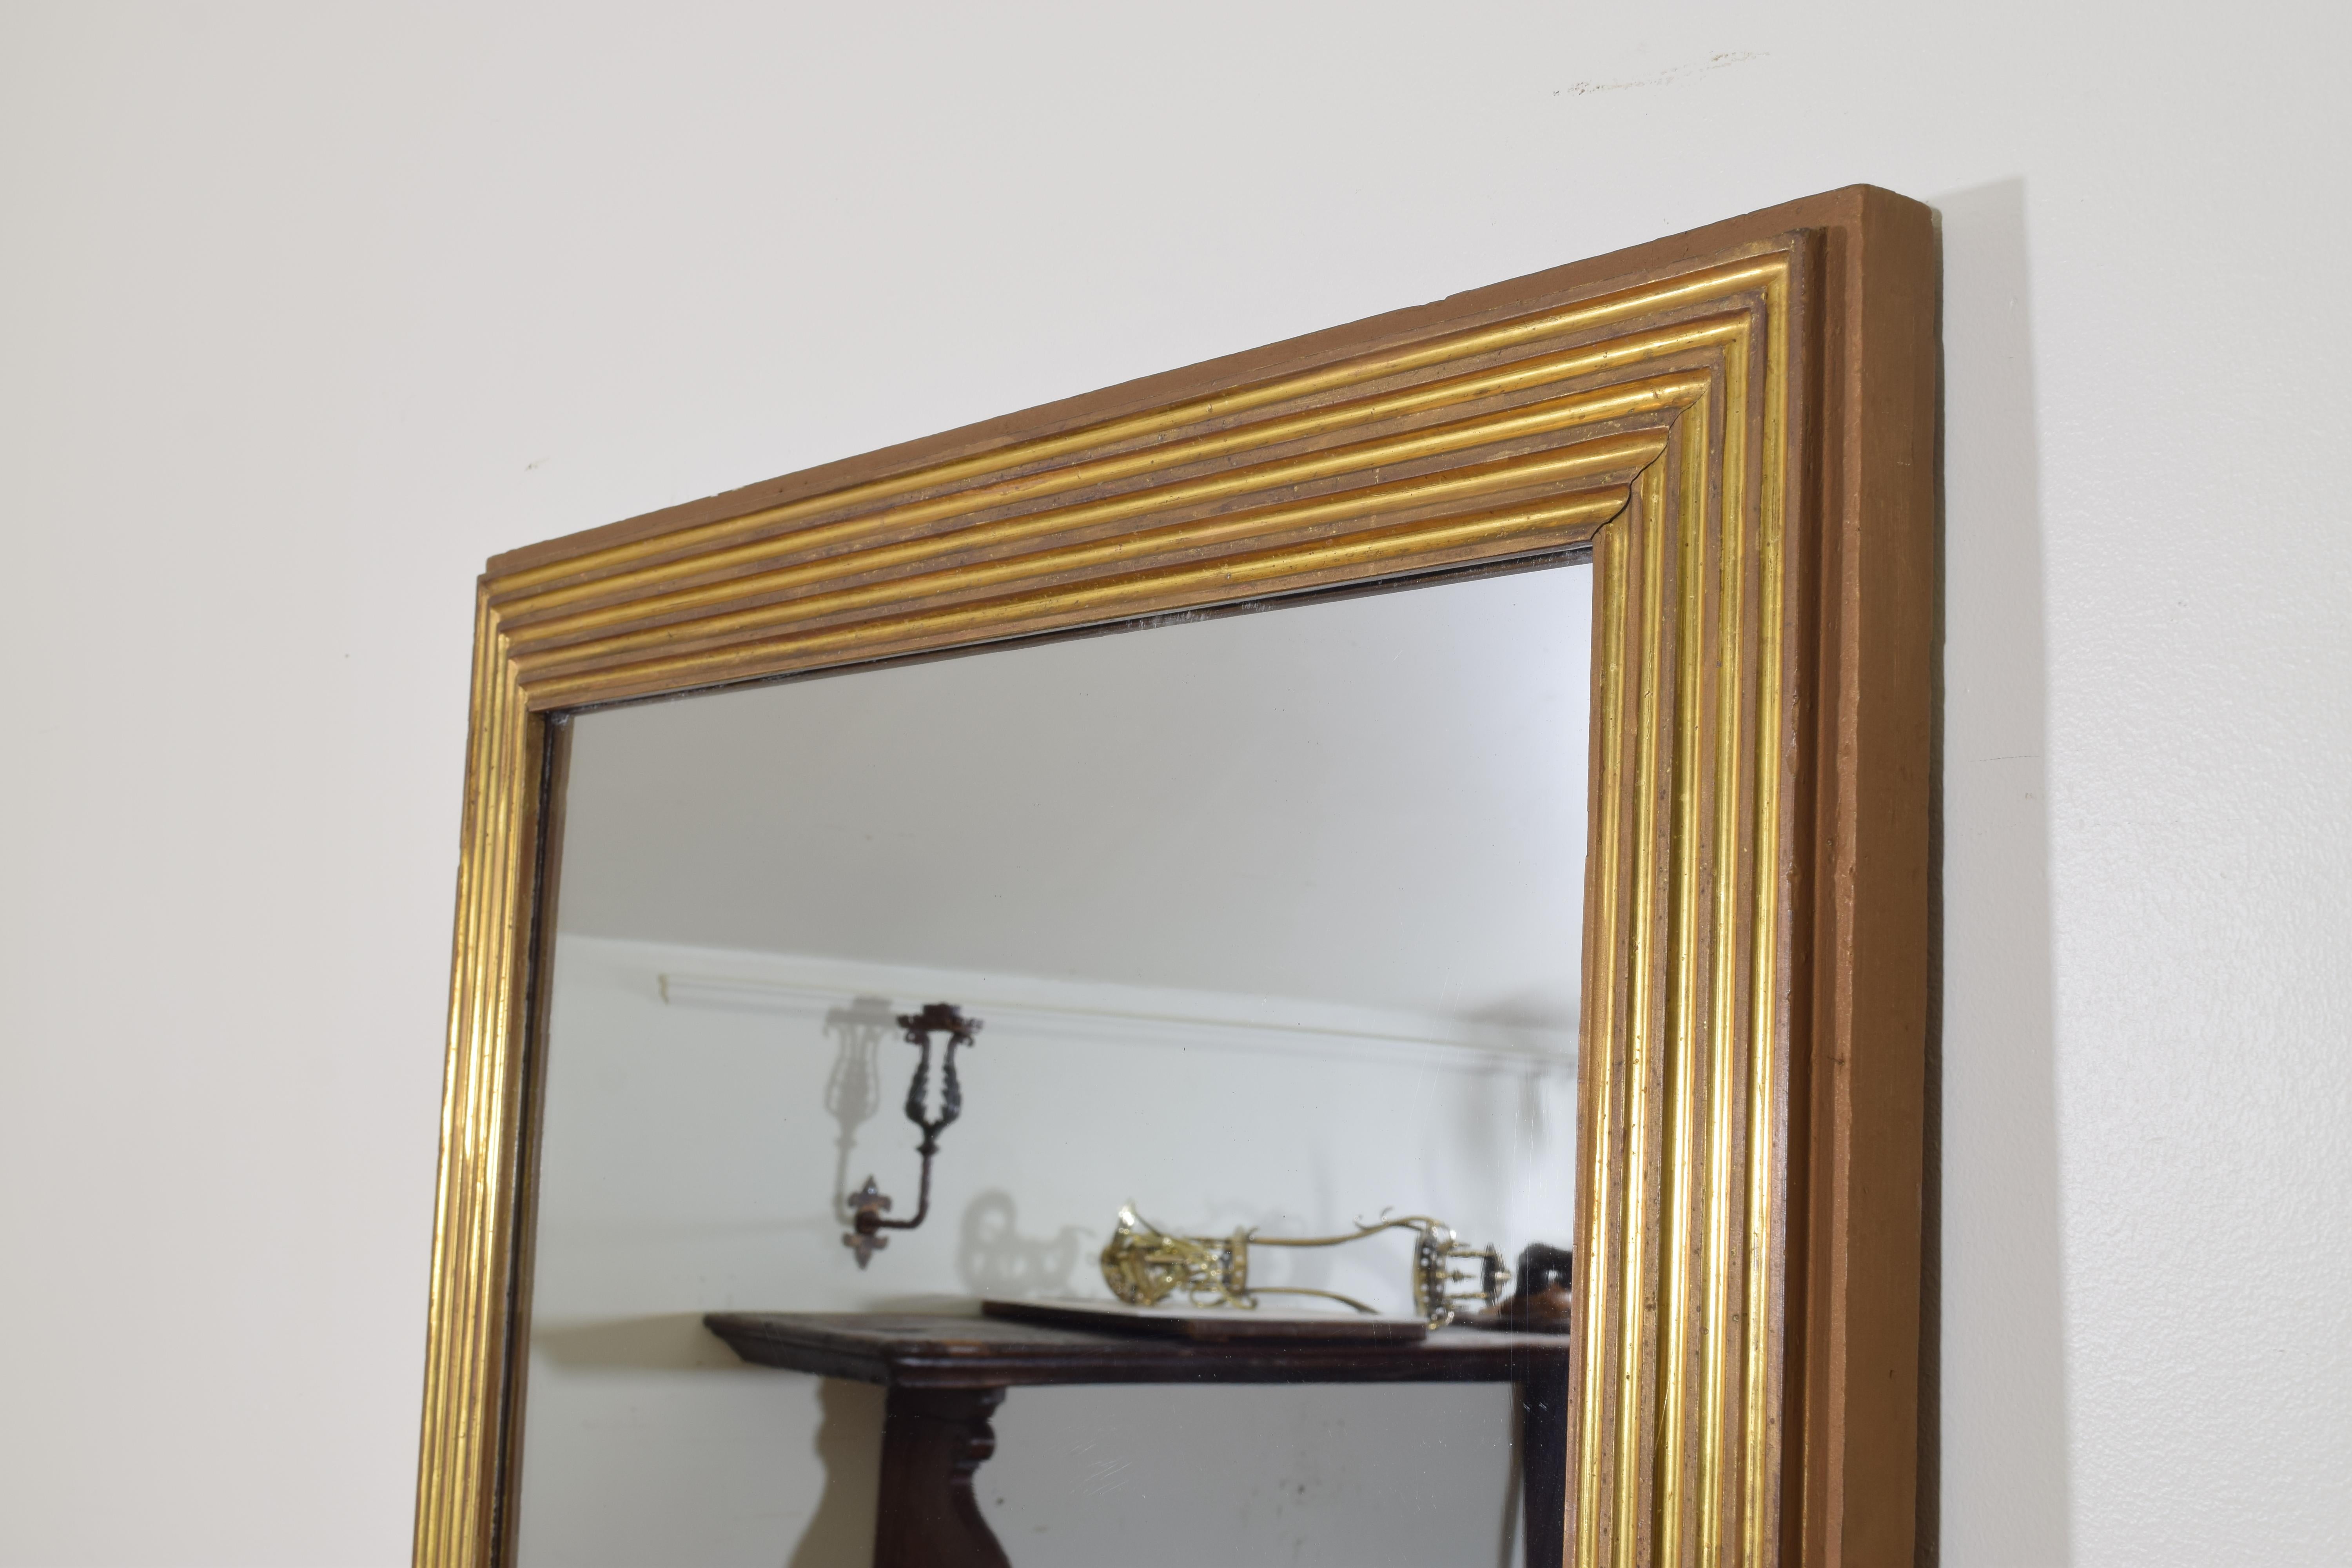 Mid-19th Century French Neoclassical Period Fluted Giltwood Mirror, 2-Piece Glass, circa 1835